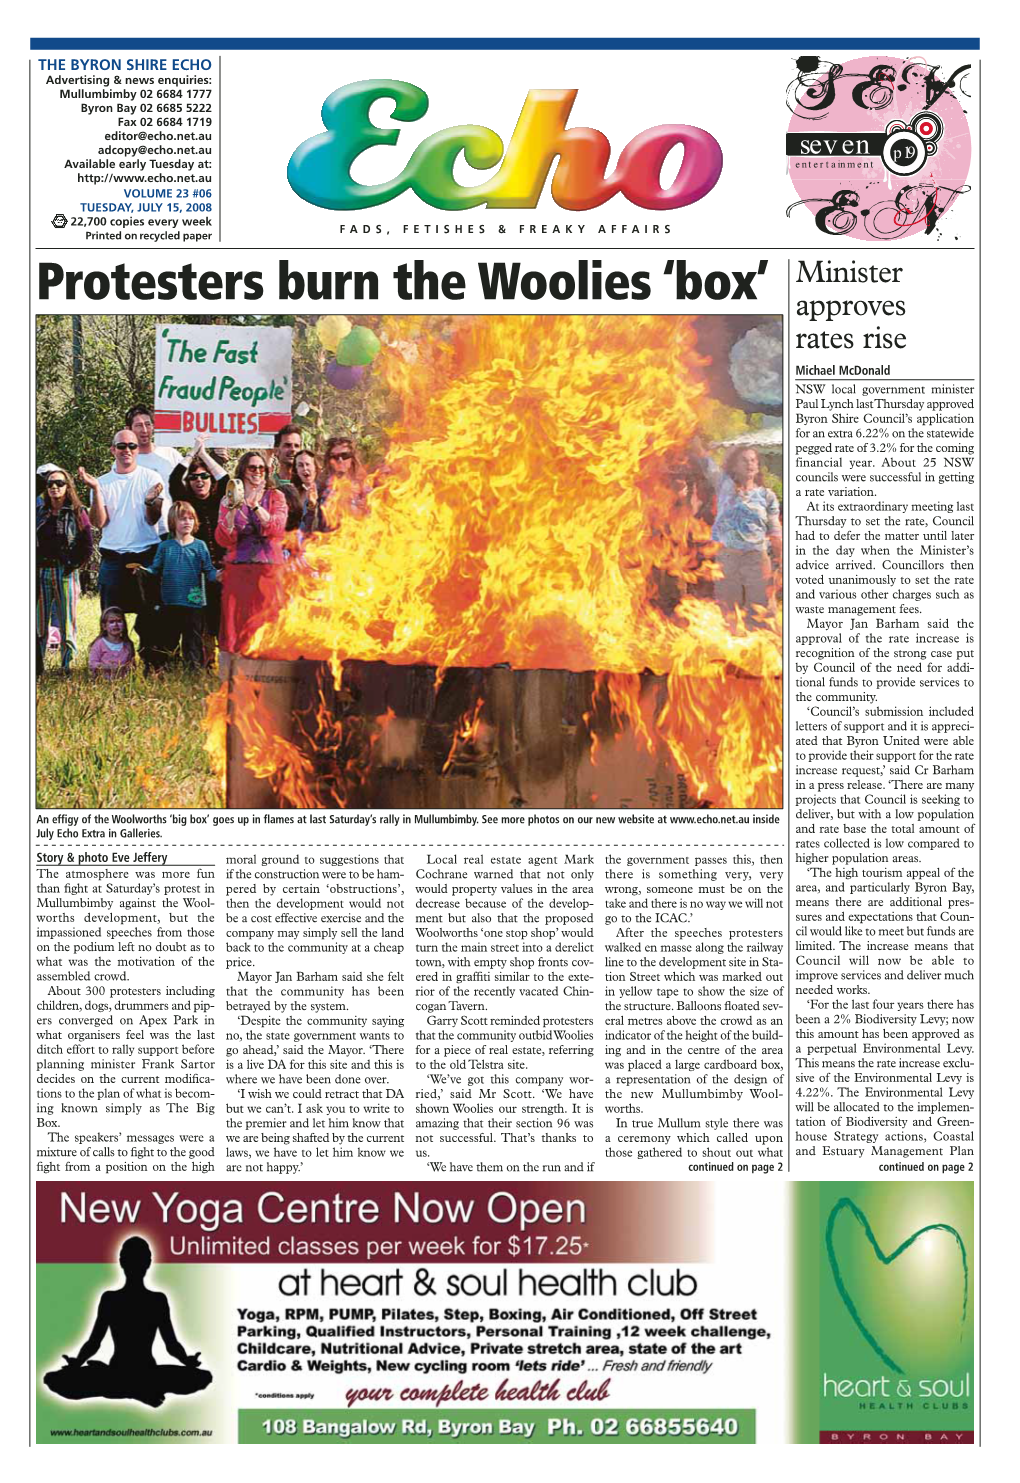 Protesters Burn the Woolies